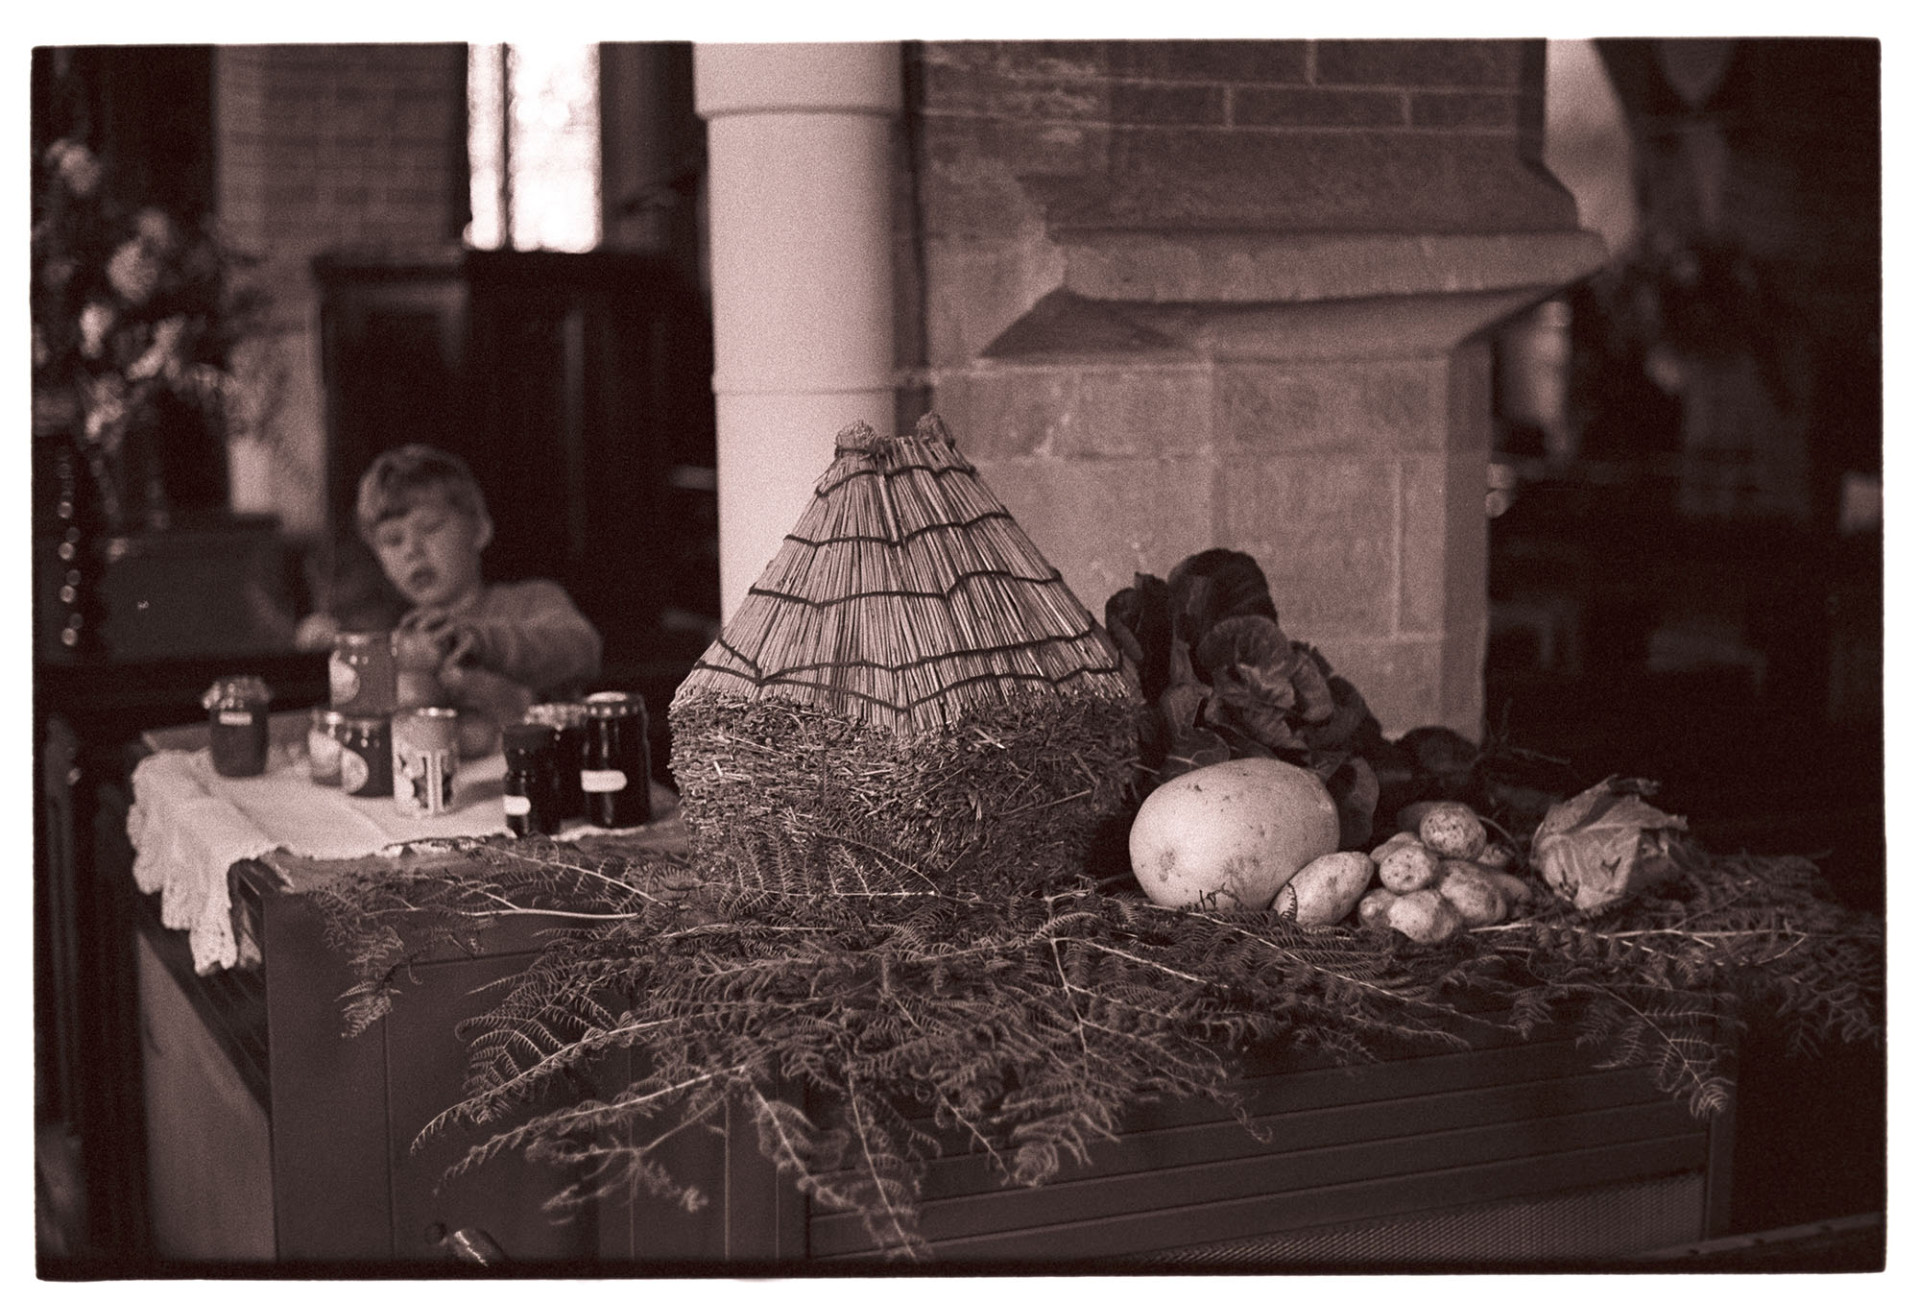 Display of produce in church Harvest Festival, with small thatched rick.
[A harvest festival display in Dolton church with vegetables, ferns and a  model thatched rick. A boy is stacking jars of jam or marmalade on a table in the background.]